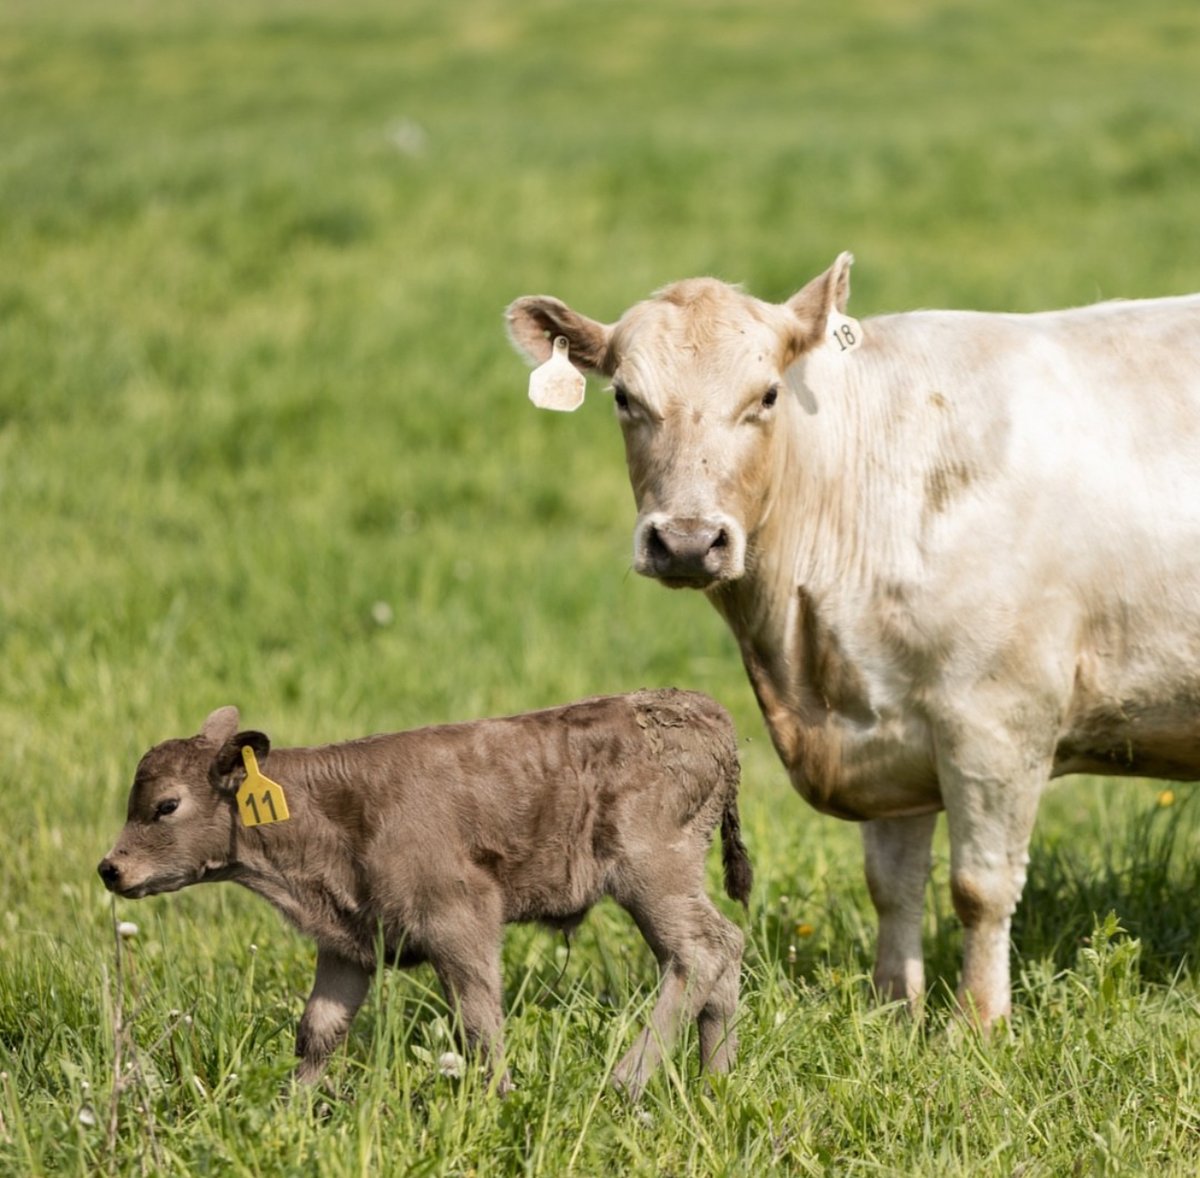 Sourcing your beef from a local farmer is a great idea Here are 3 questions to ask your farmer before purchasing - Are they grass fed AND grass finished? - Do they practice regenerative farming? - Do they use pesticides, herbicides or insecticides?